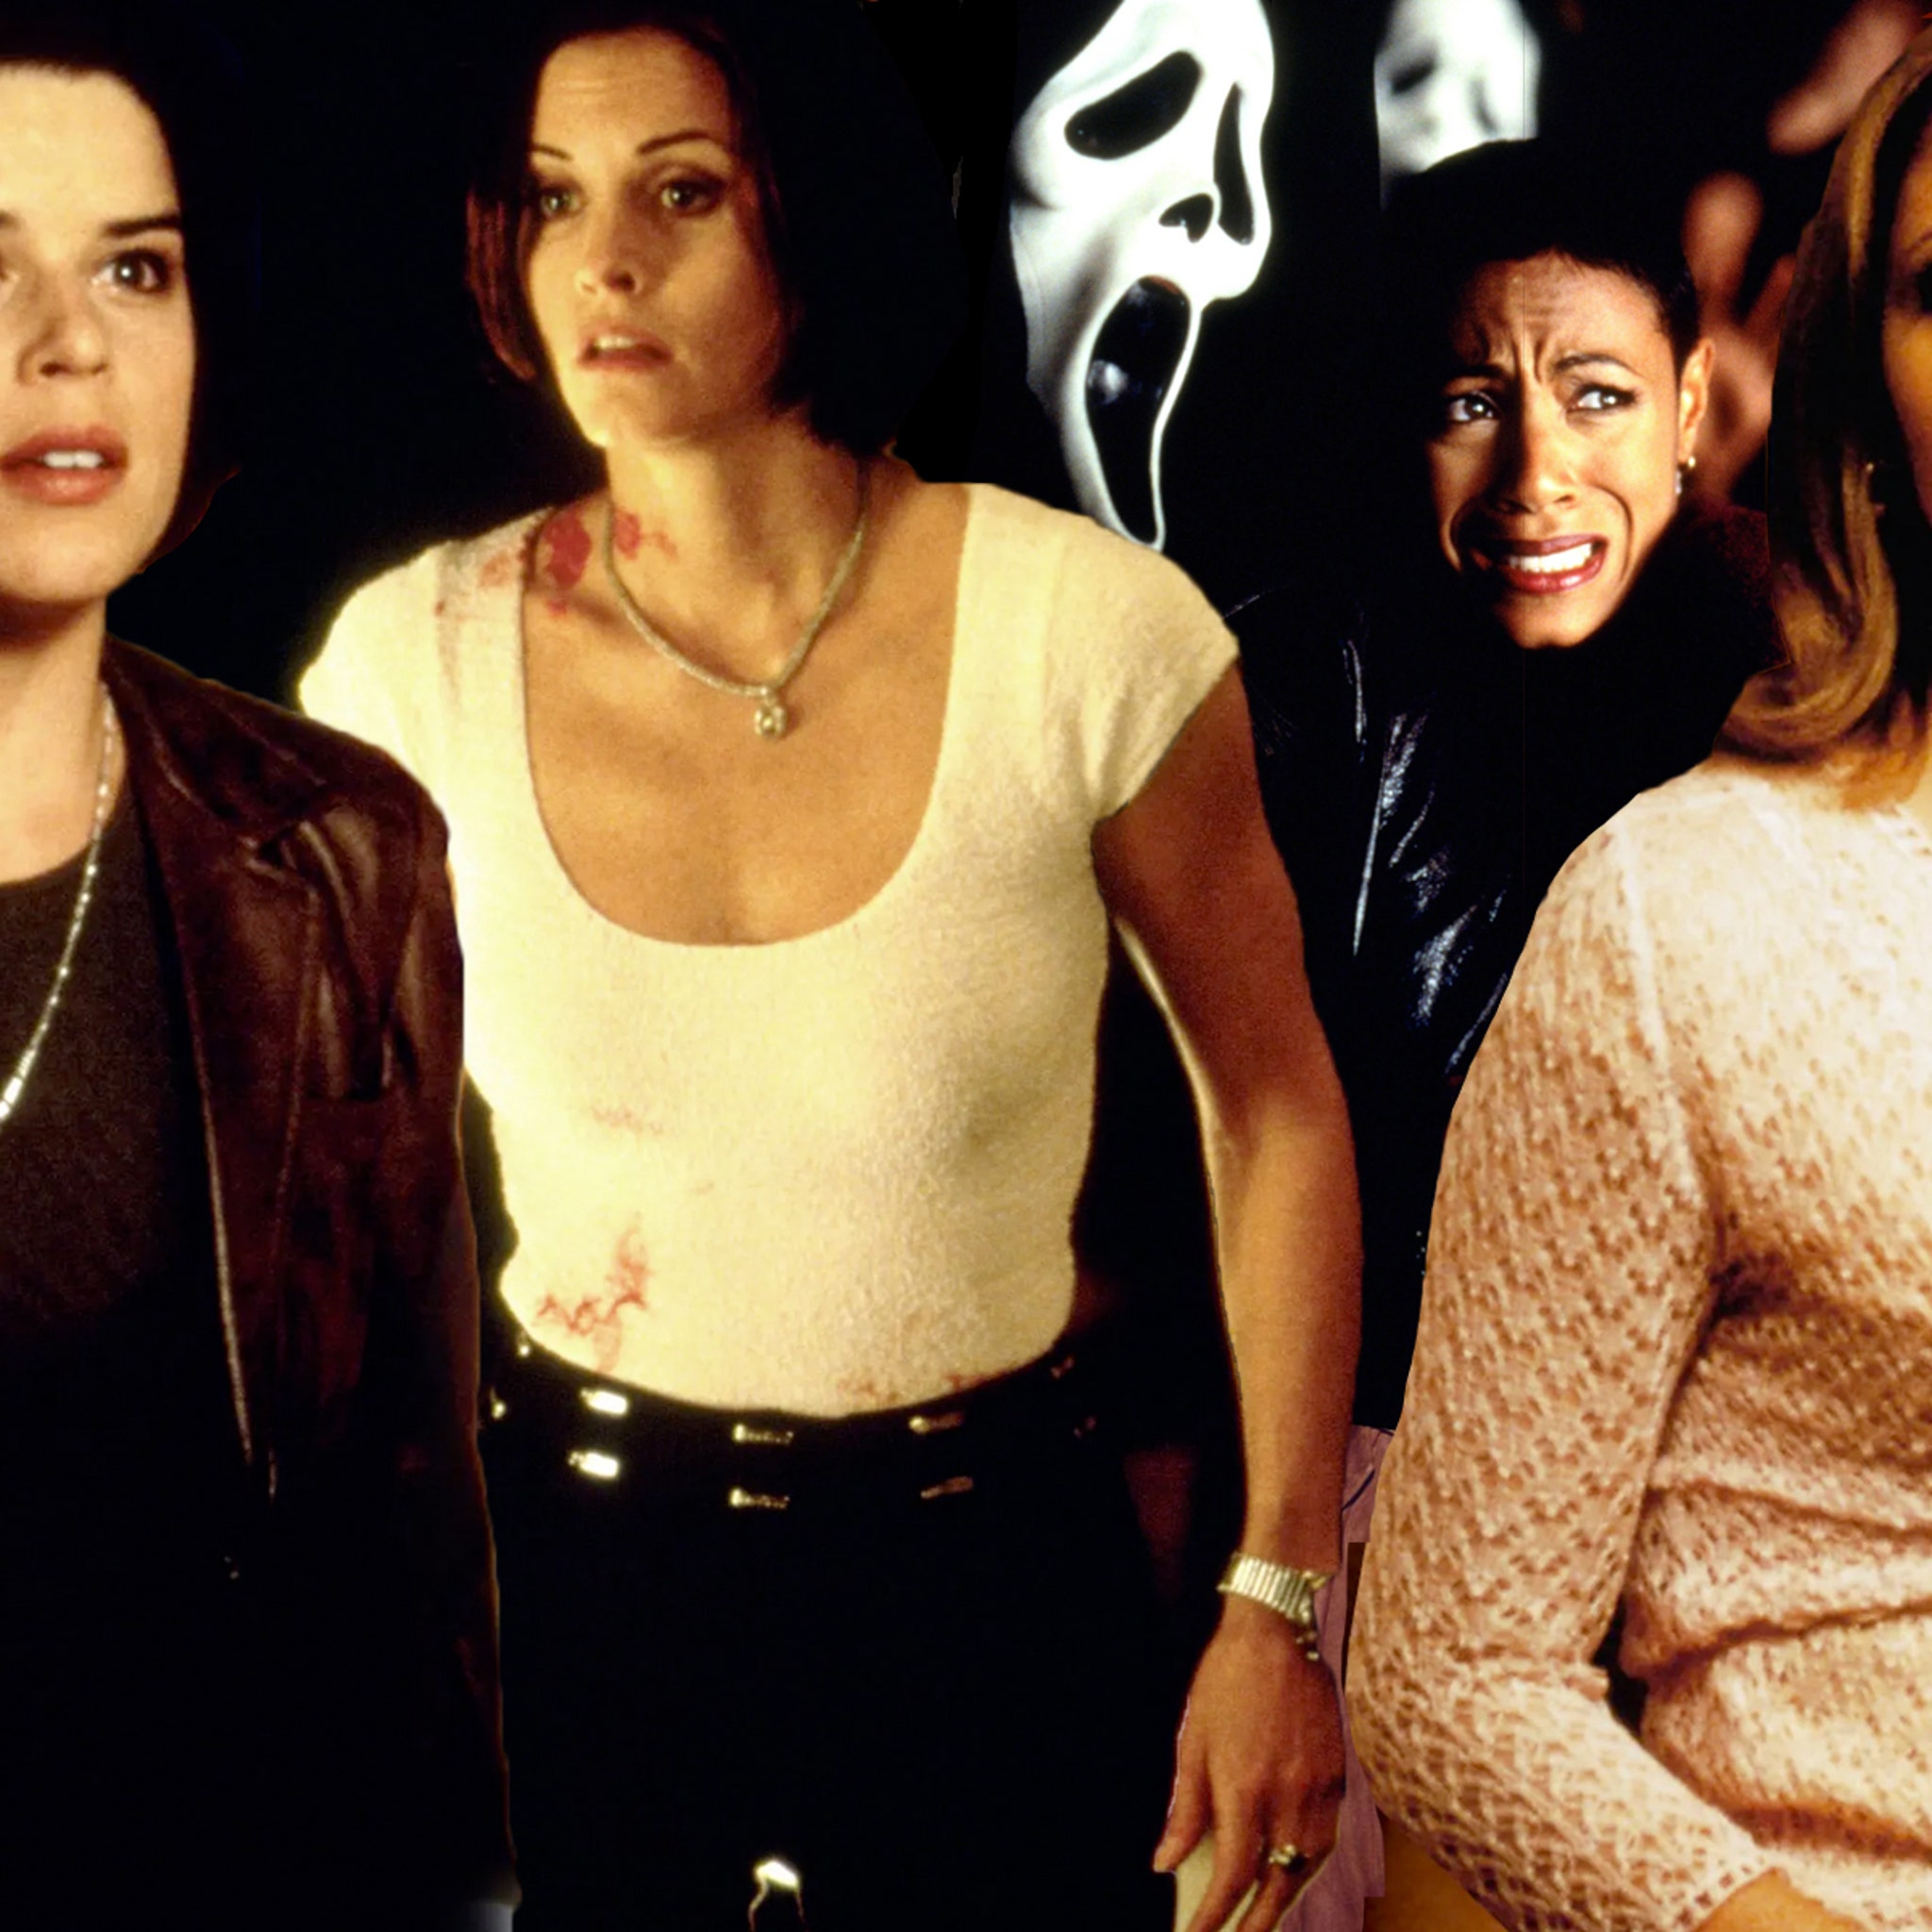 Scream 2 Turns 25: Where Are They Now?